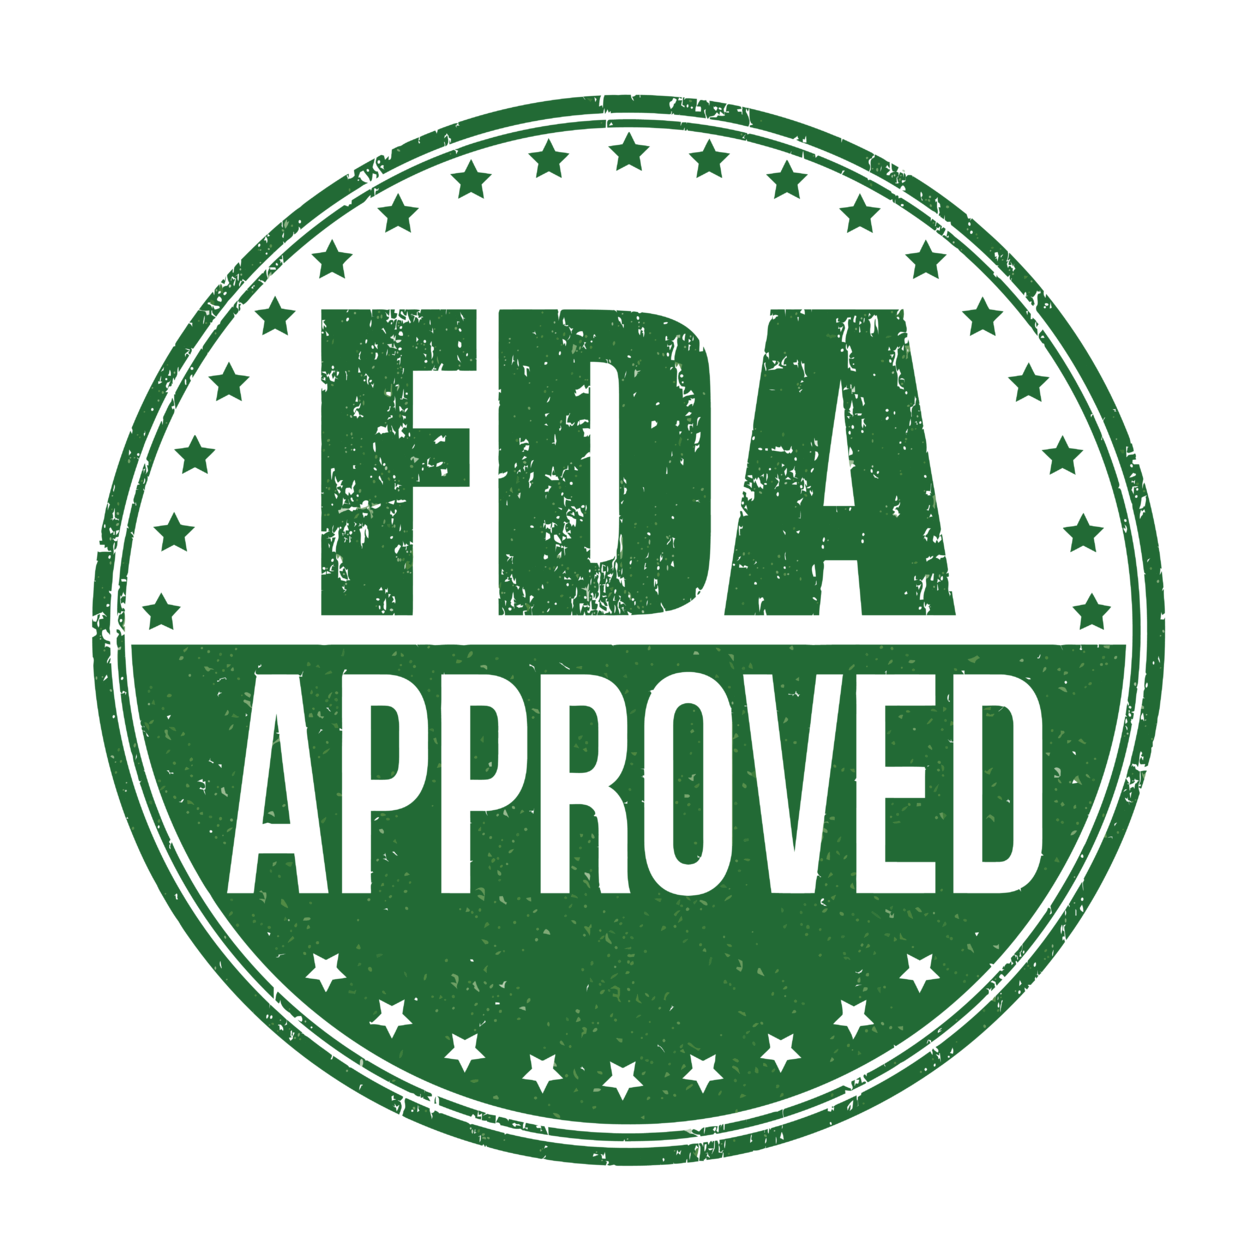 FDA Approves Diroximel Fumarate to Treat Relapsing Forms of MS